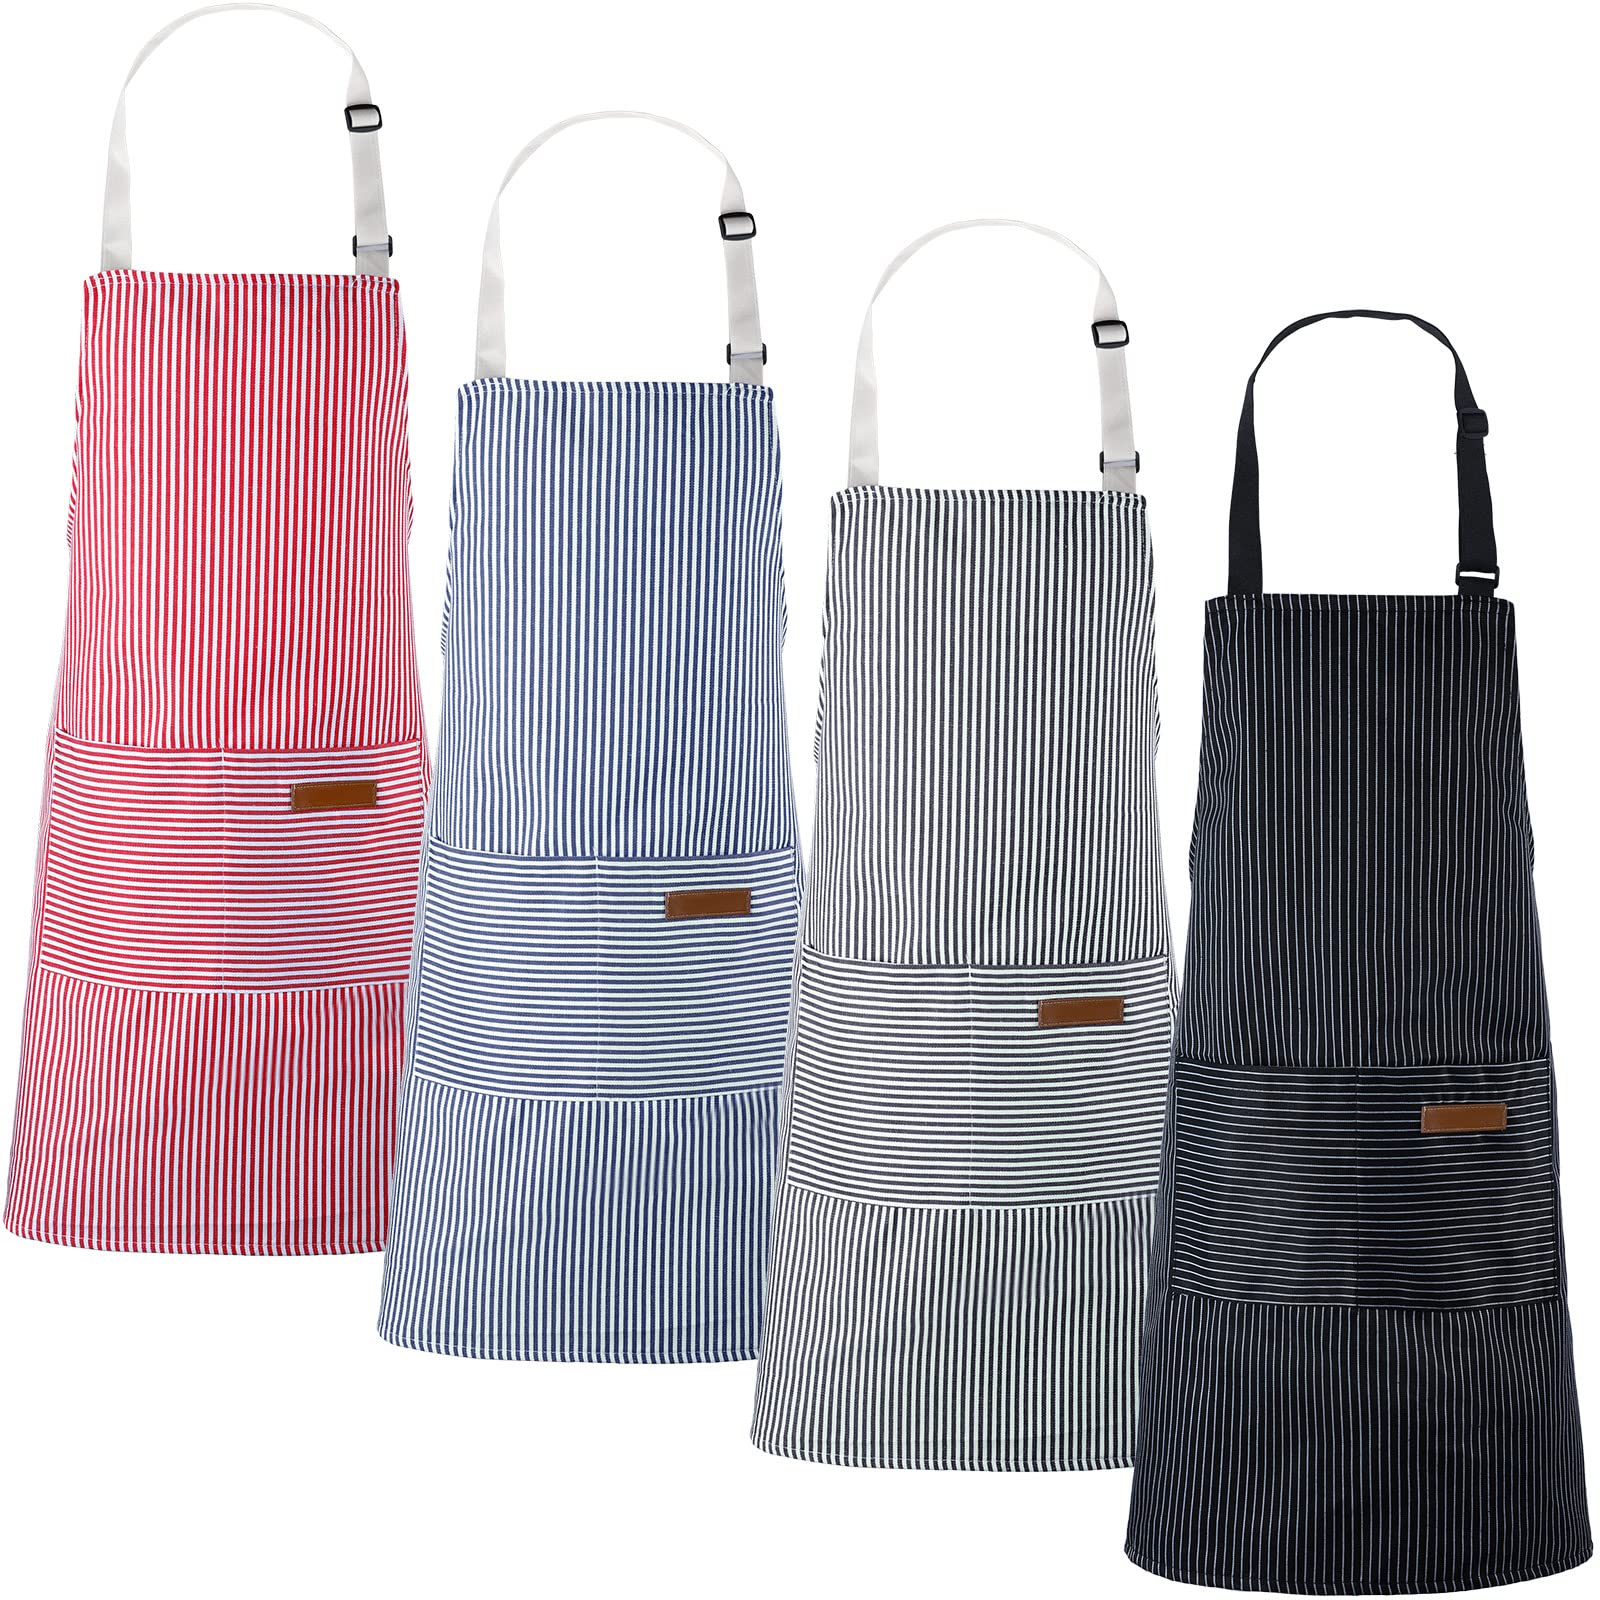 Cooking Apron with Pockets Waterproof Baking Apron Soft Chef Kitchen Aprons